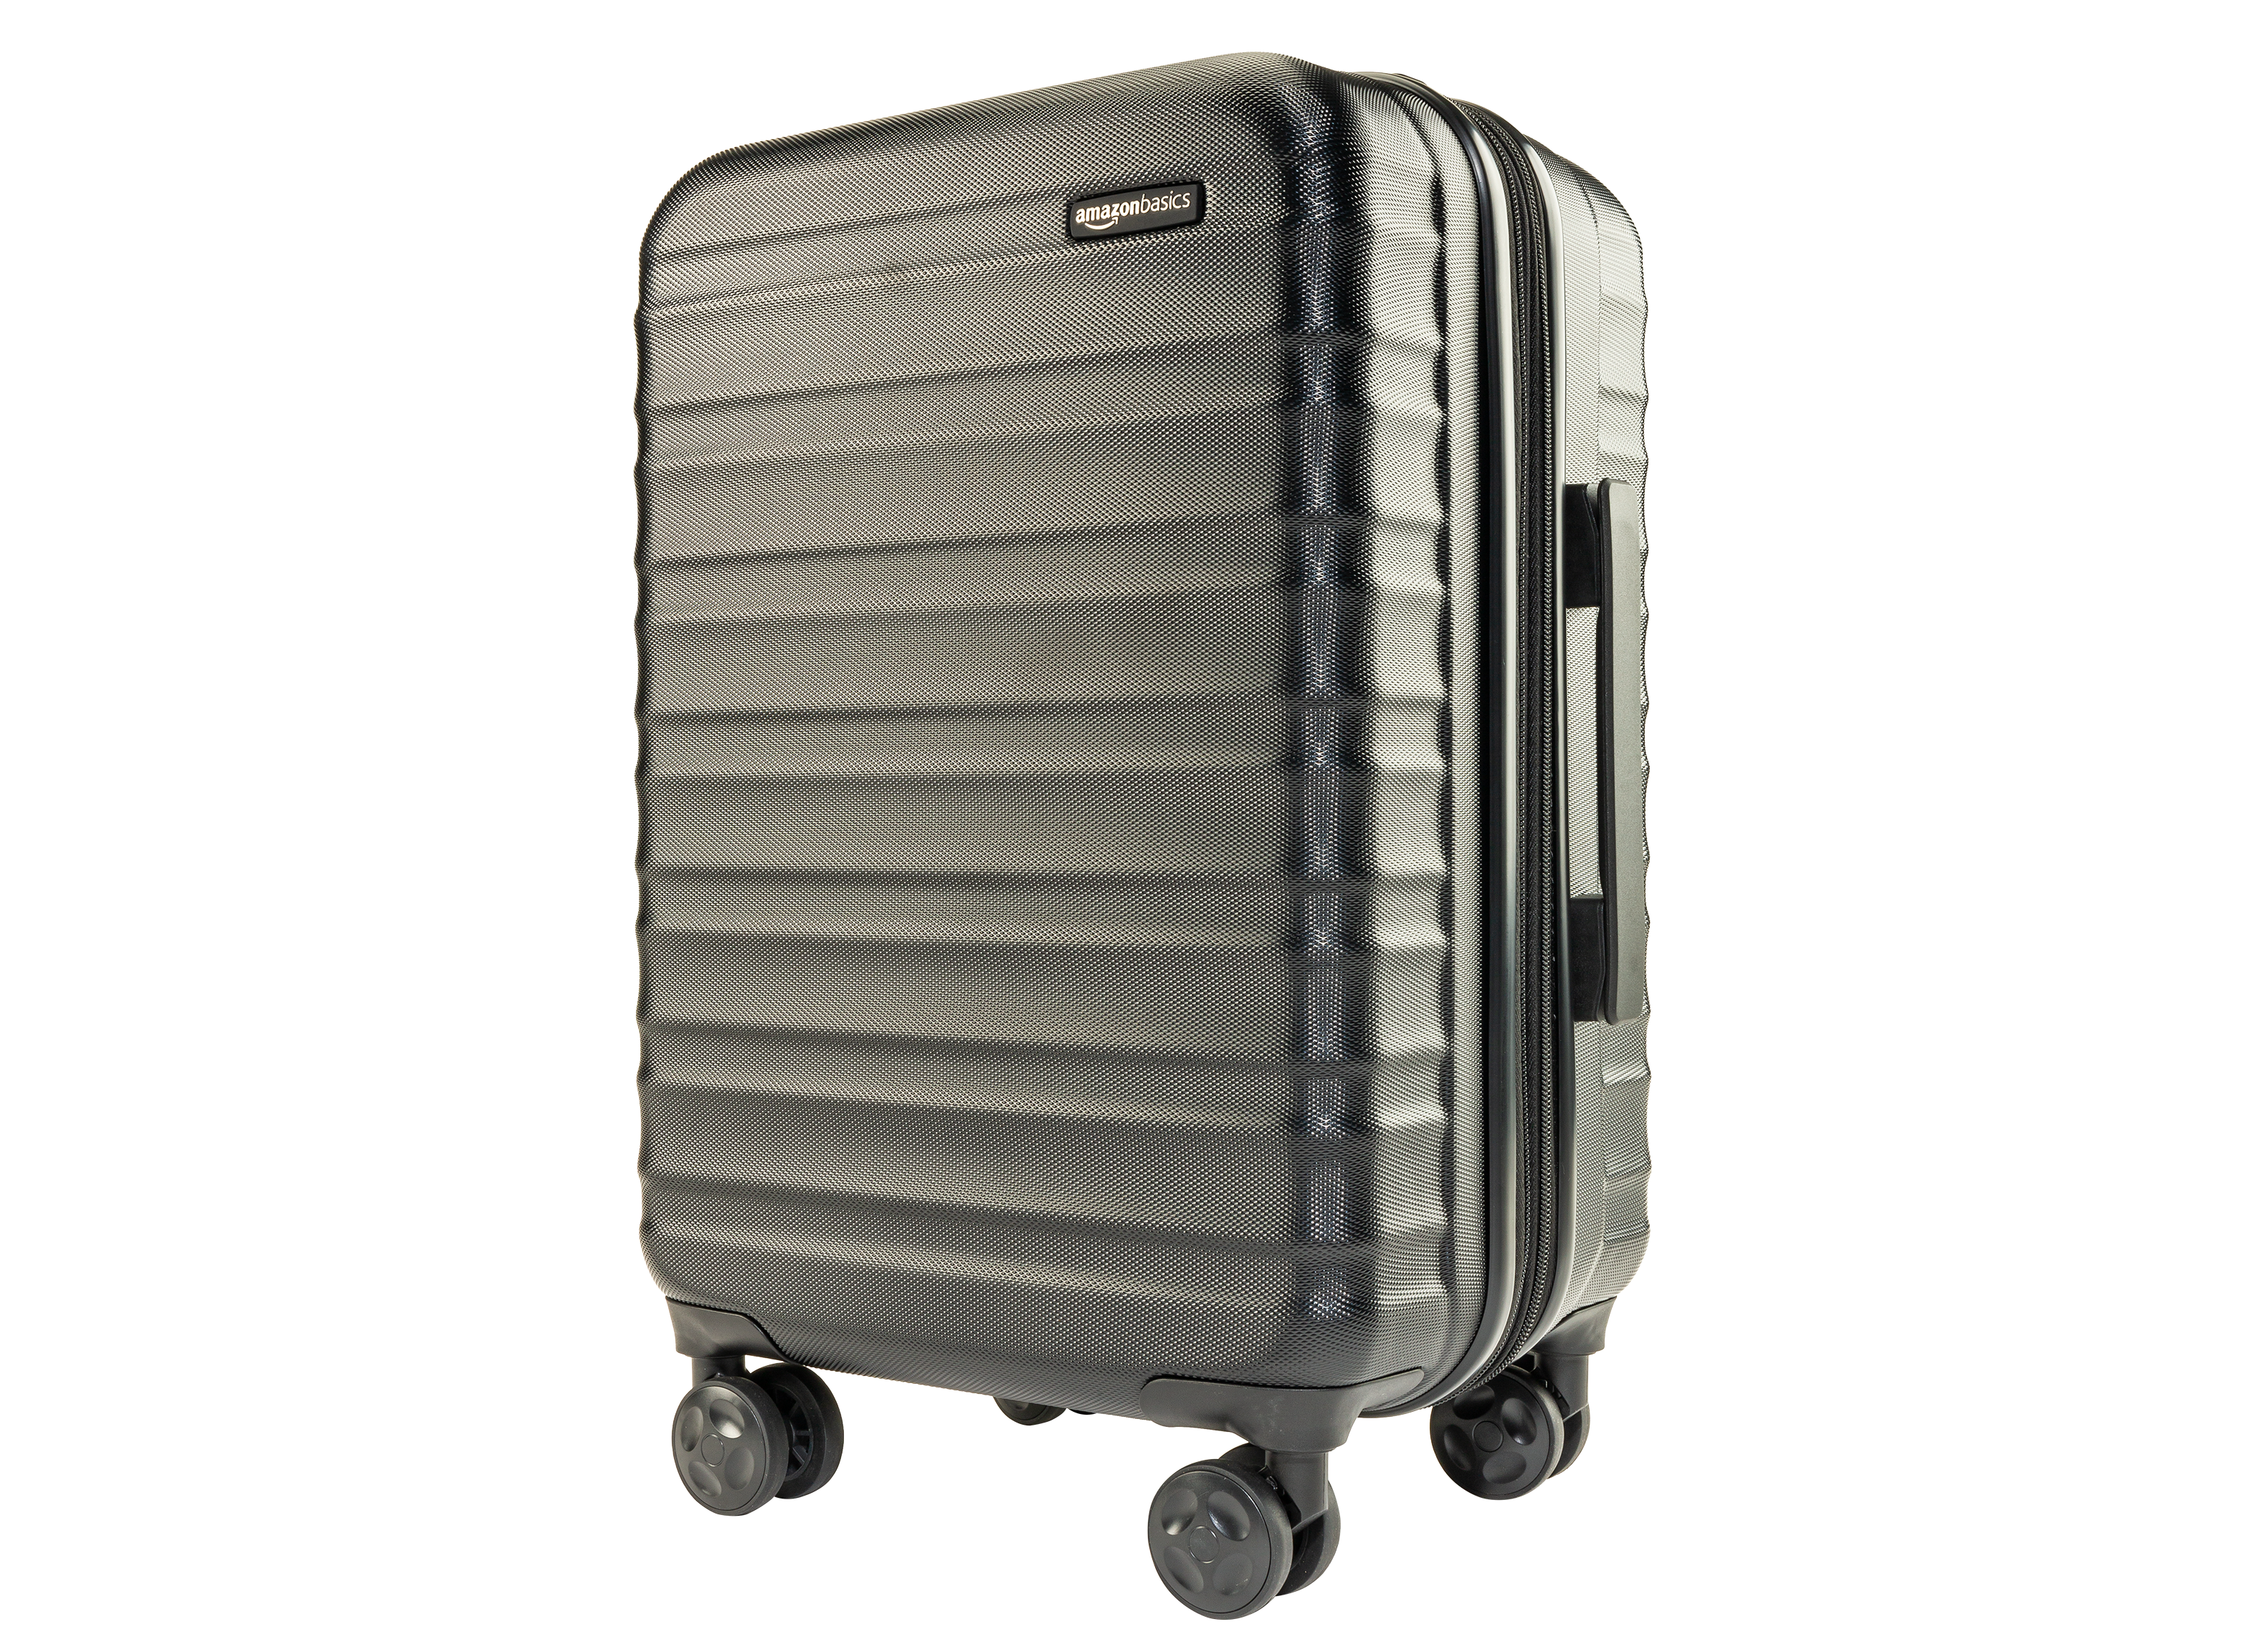 https://crdms.images.consumerreports.org/prod/products/cr/models/405008-carry-on-luggage-amazon-basics-21-inch-hardside-spinner-10026944.png